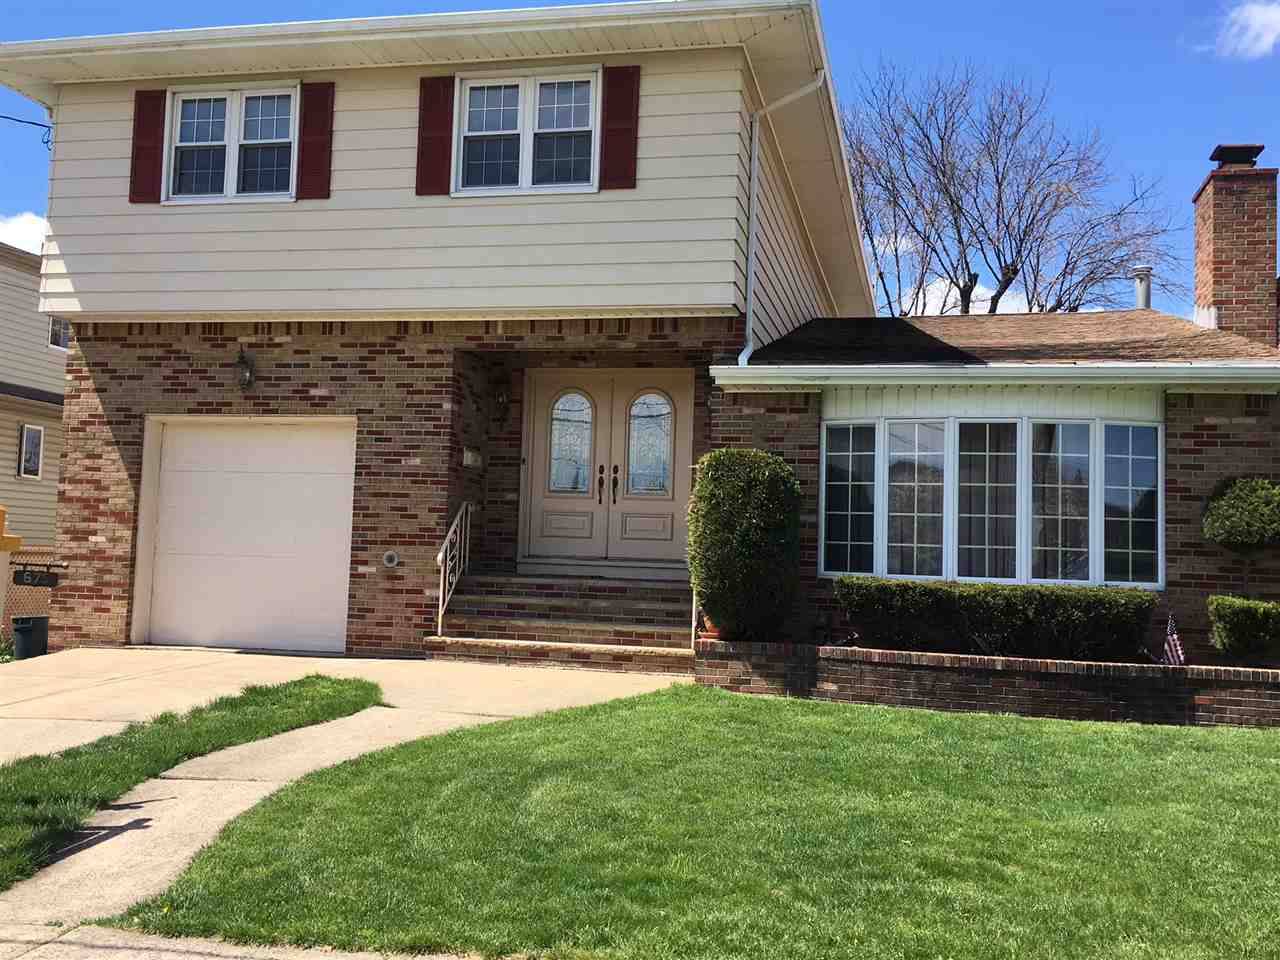 Welcome to this Custom Built Home in the Clarendon Section of Secaucus with approx